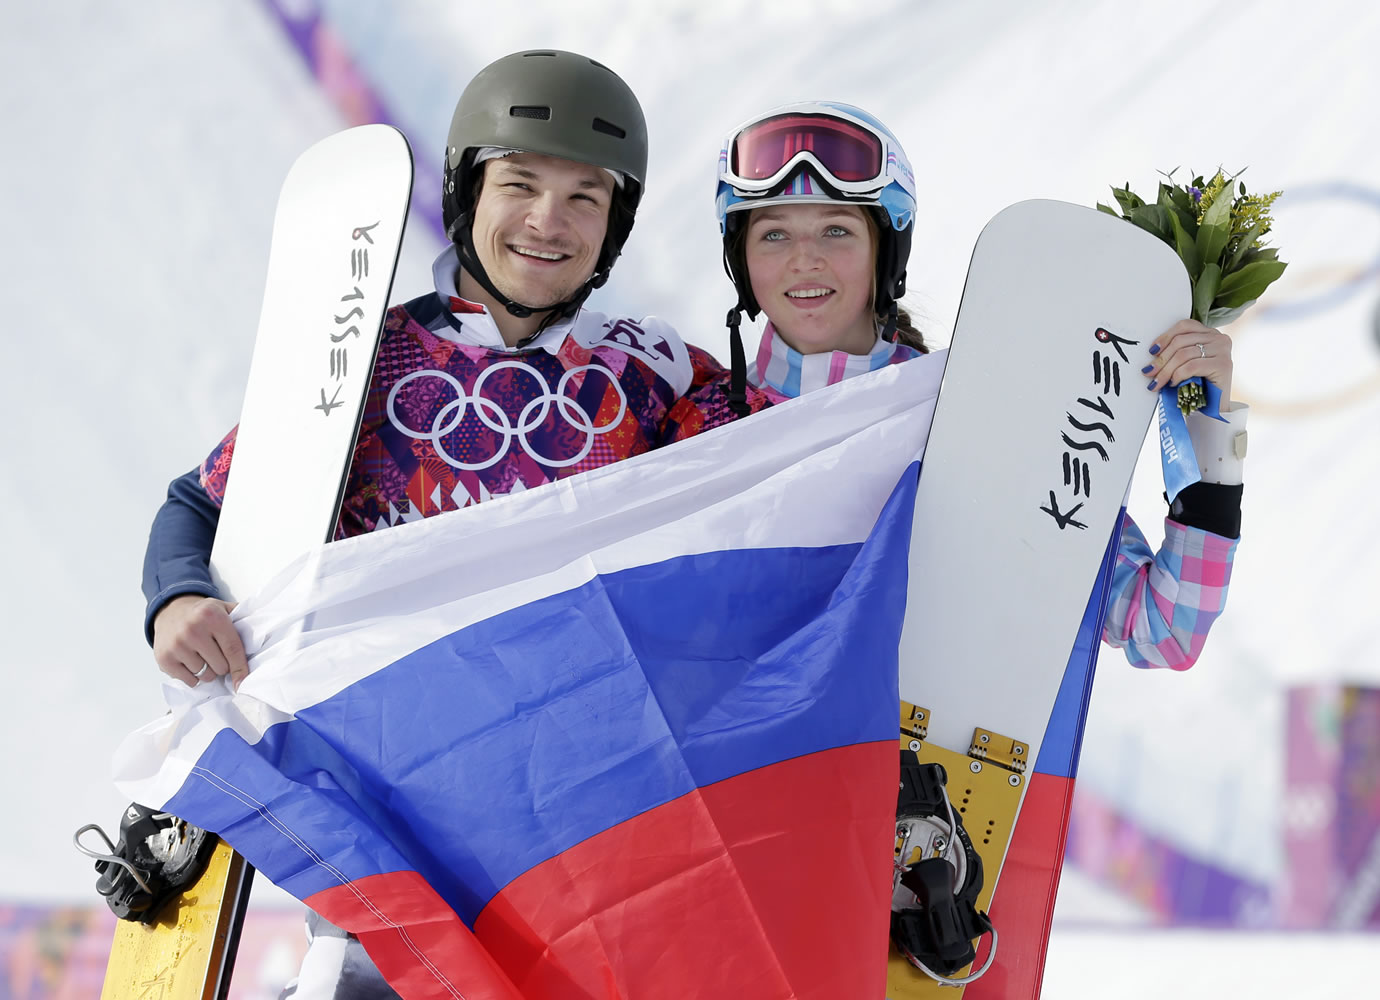 Russia's Vic Wild, left, poses after winning the gold medal in the men's snowboard parallel giant slalom final, with his wife and bronze medalist in the women's snowboard parallel giant slalom final, Russia's Alena Zavarzina.